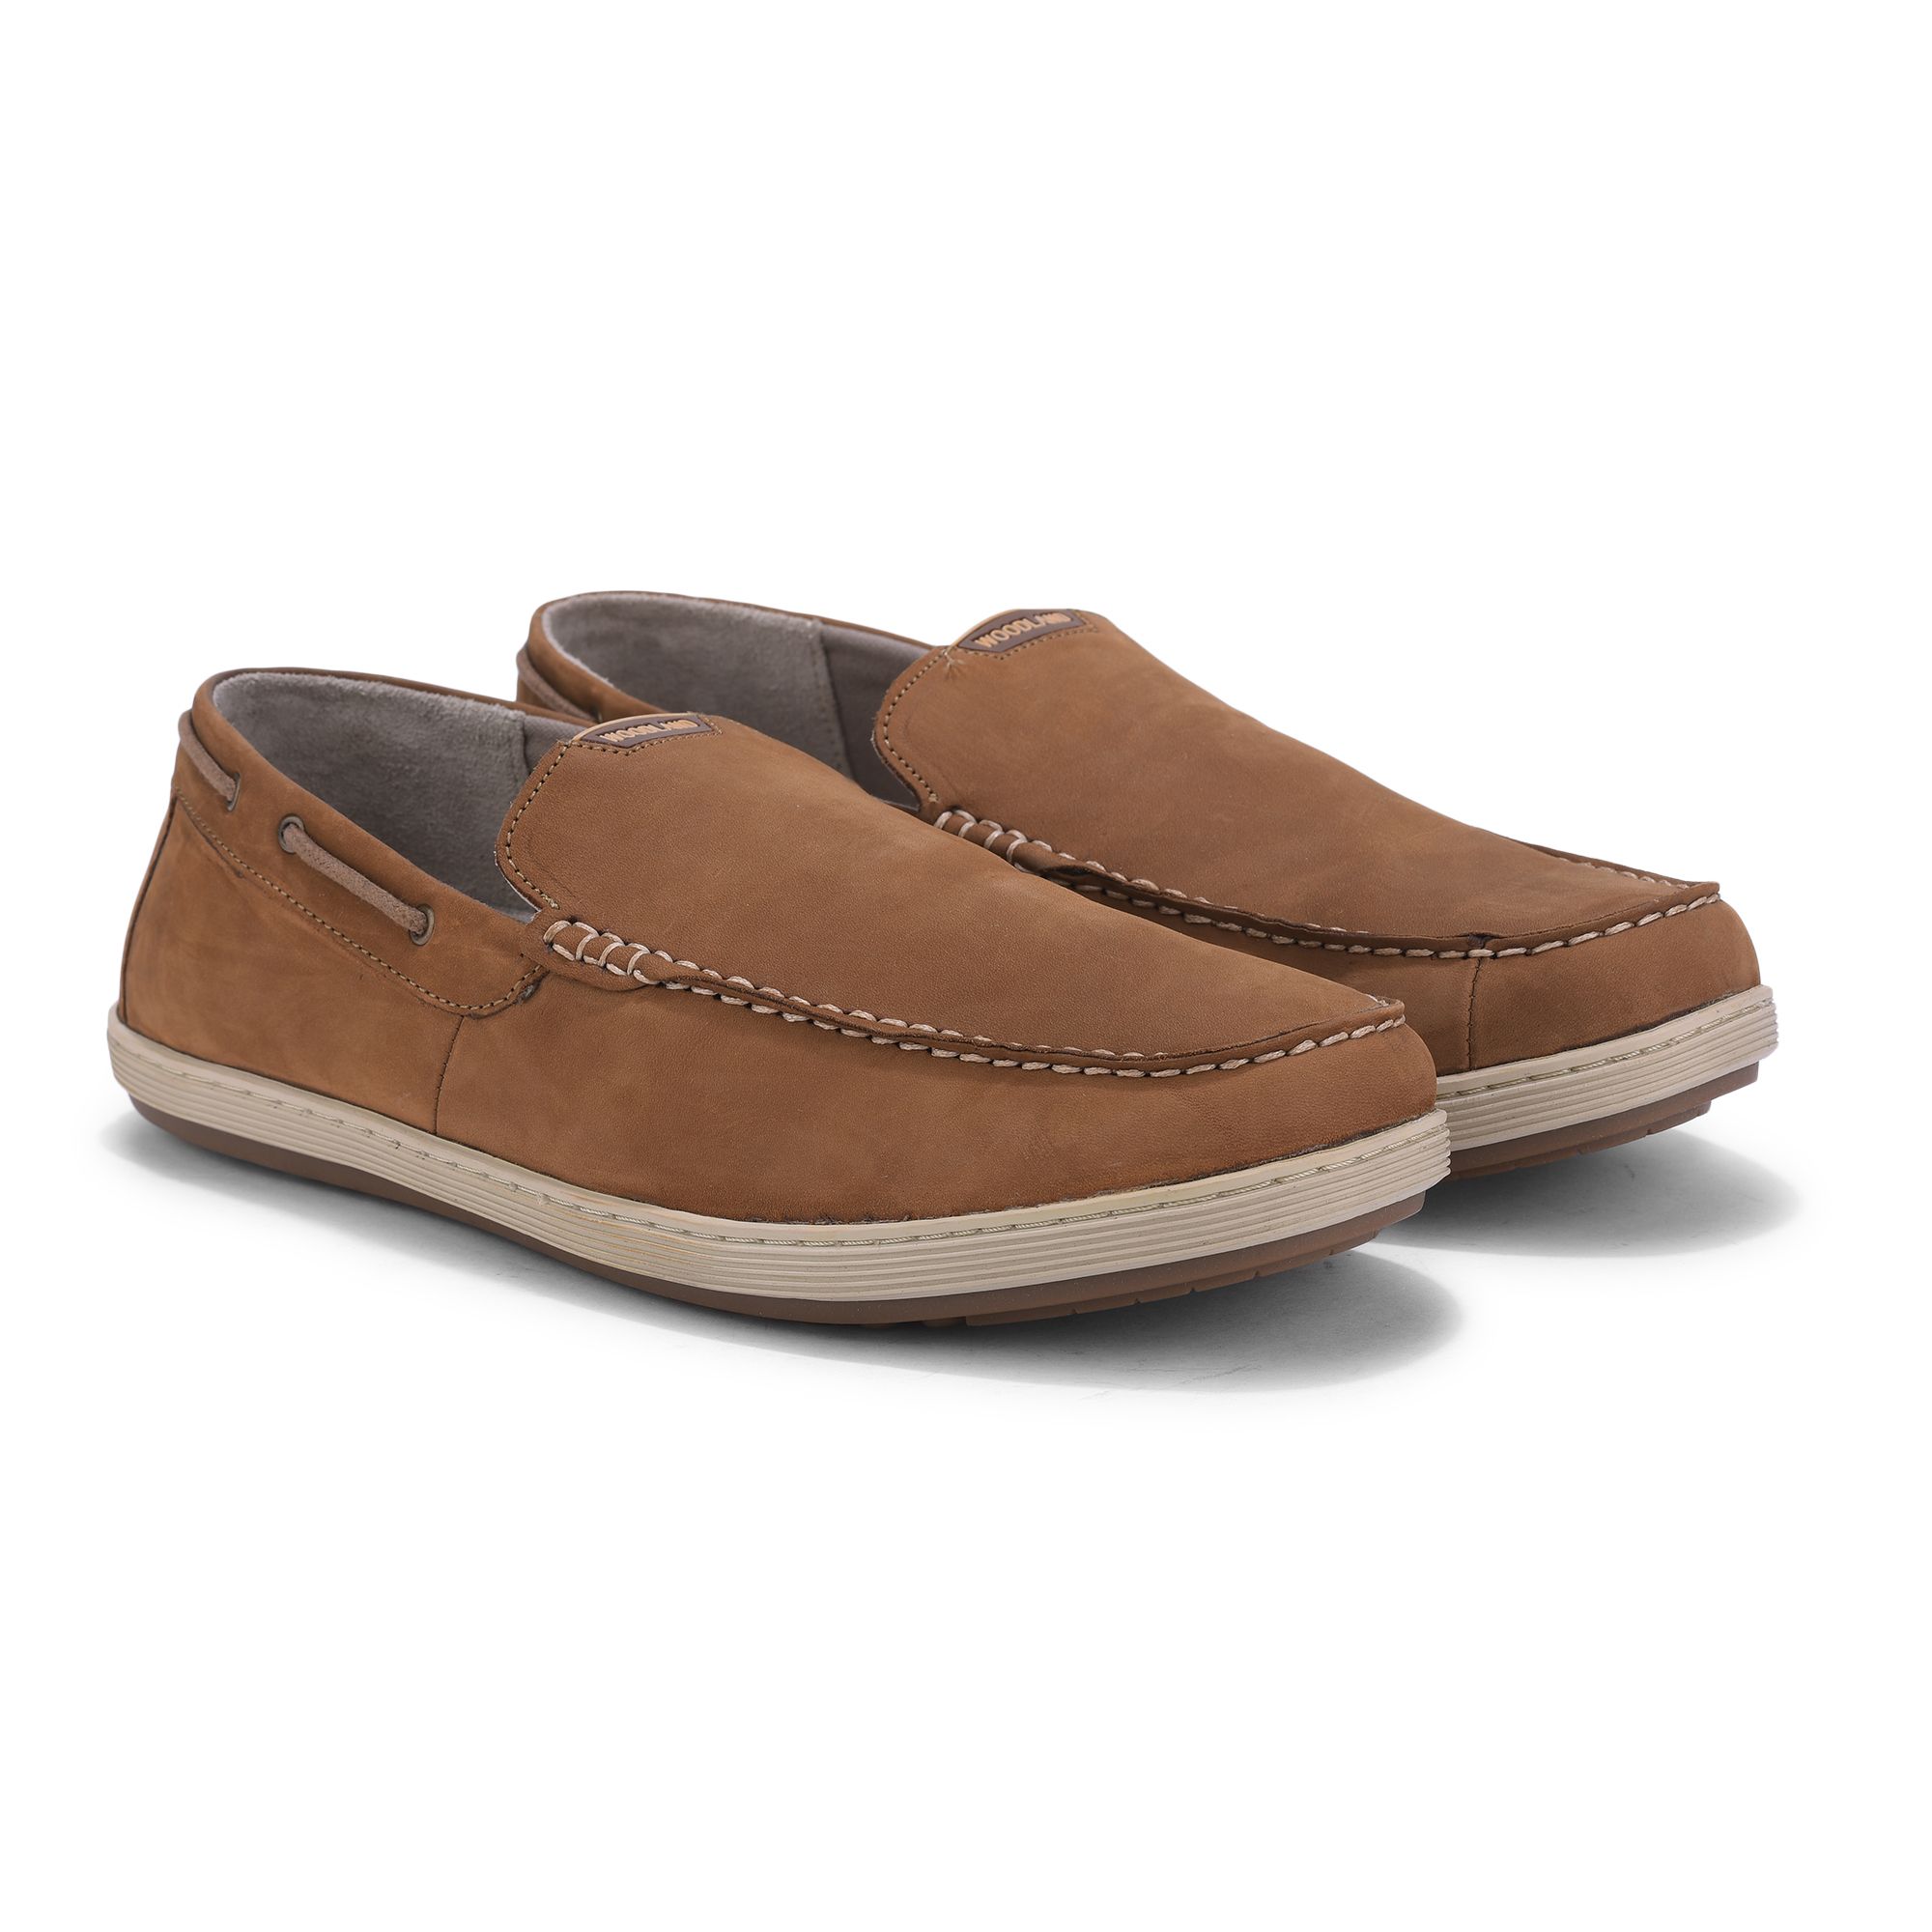 Woodland CASHEW BROWN casual SHOES